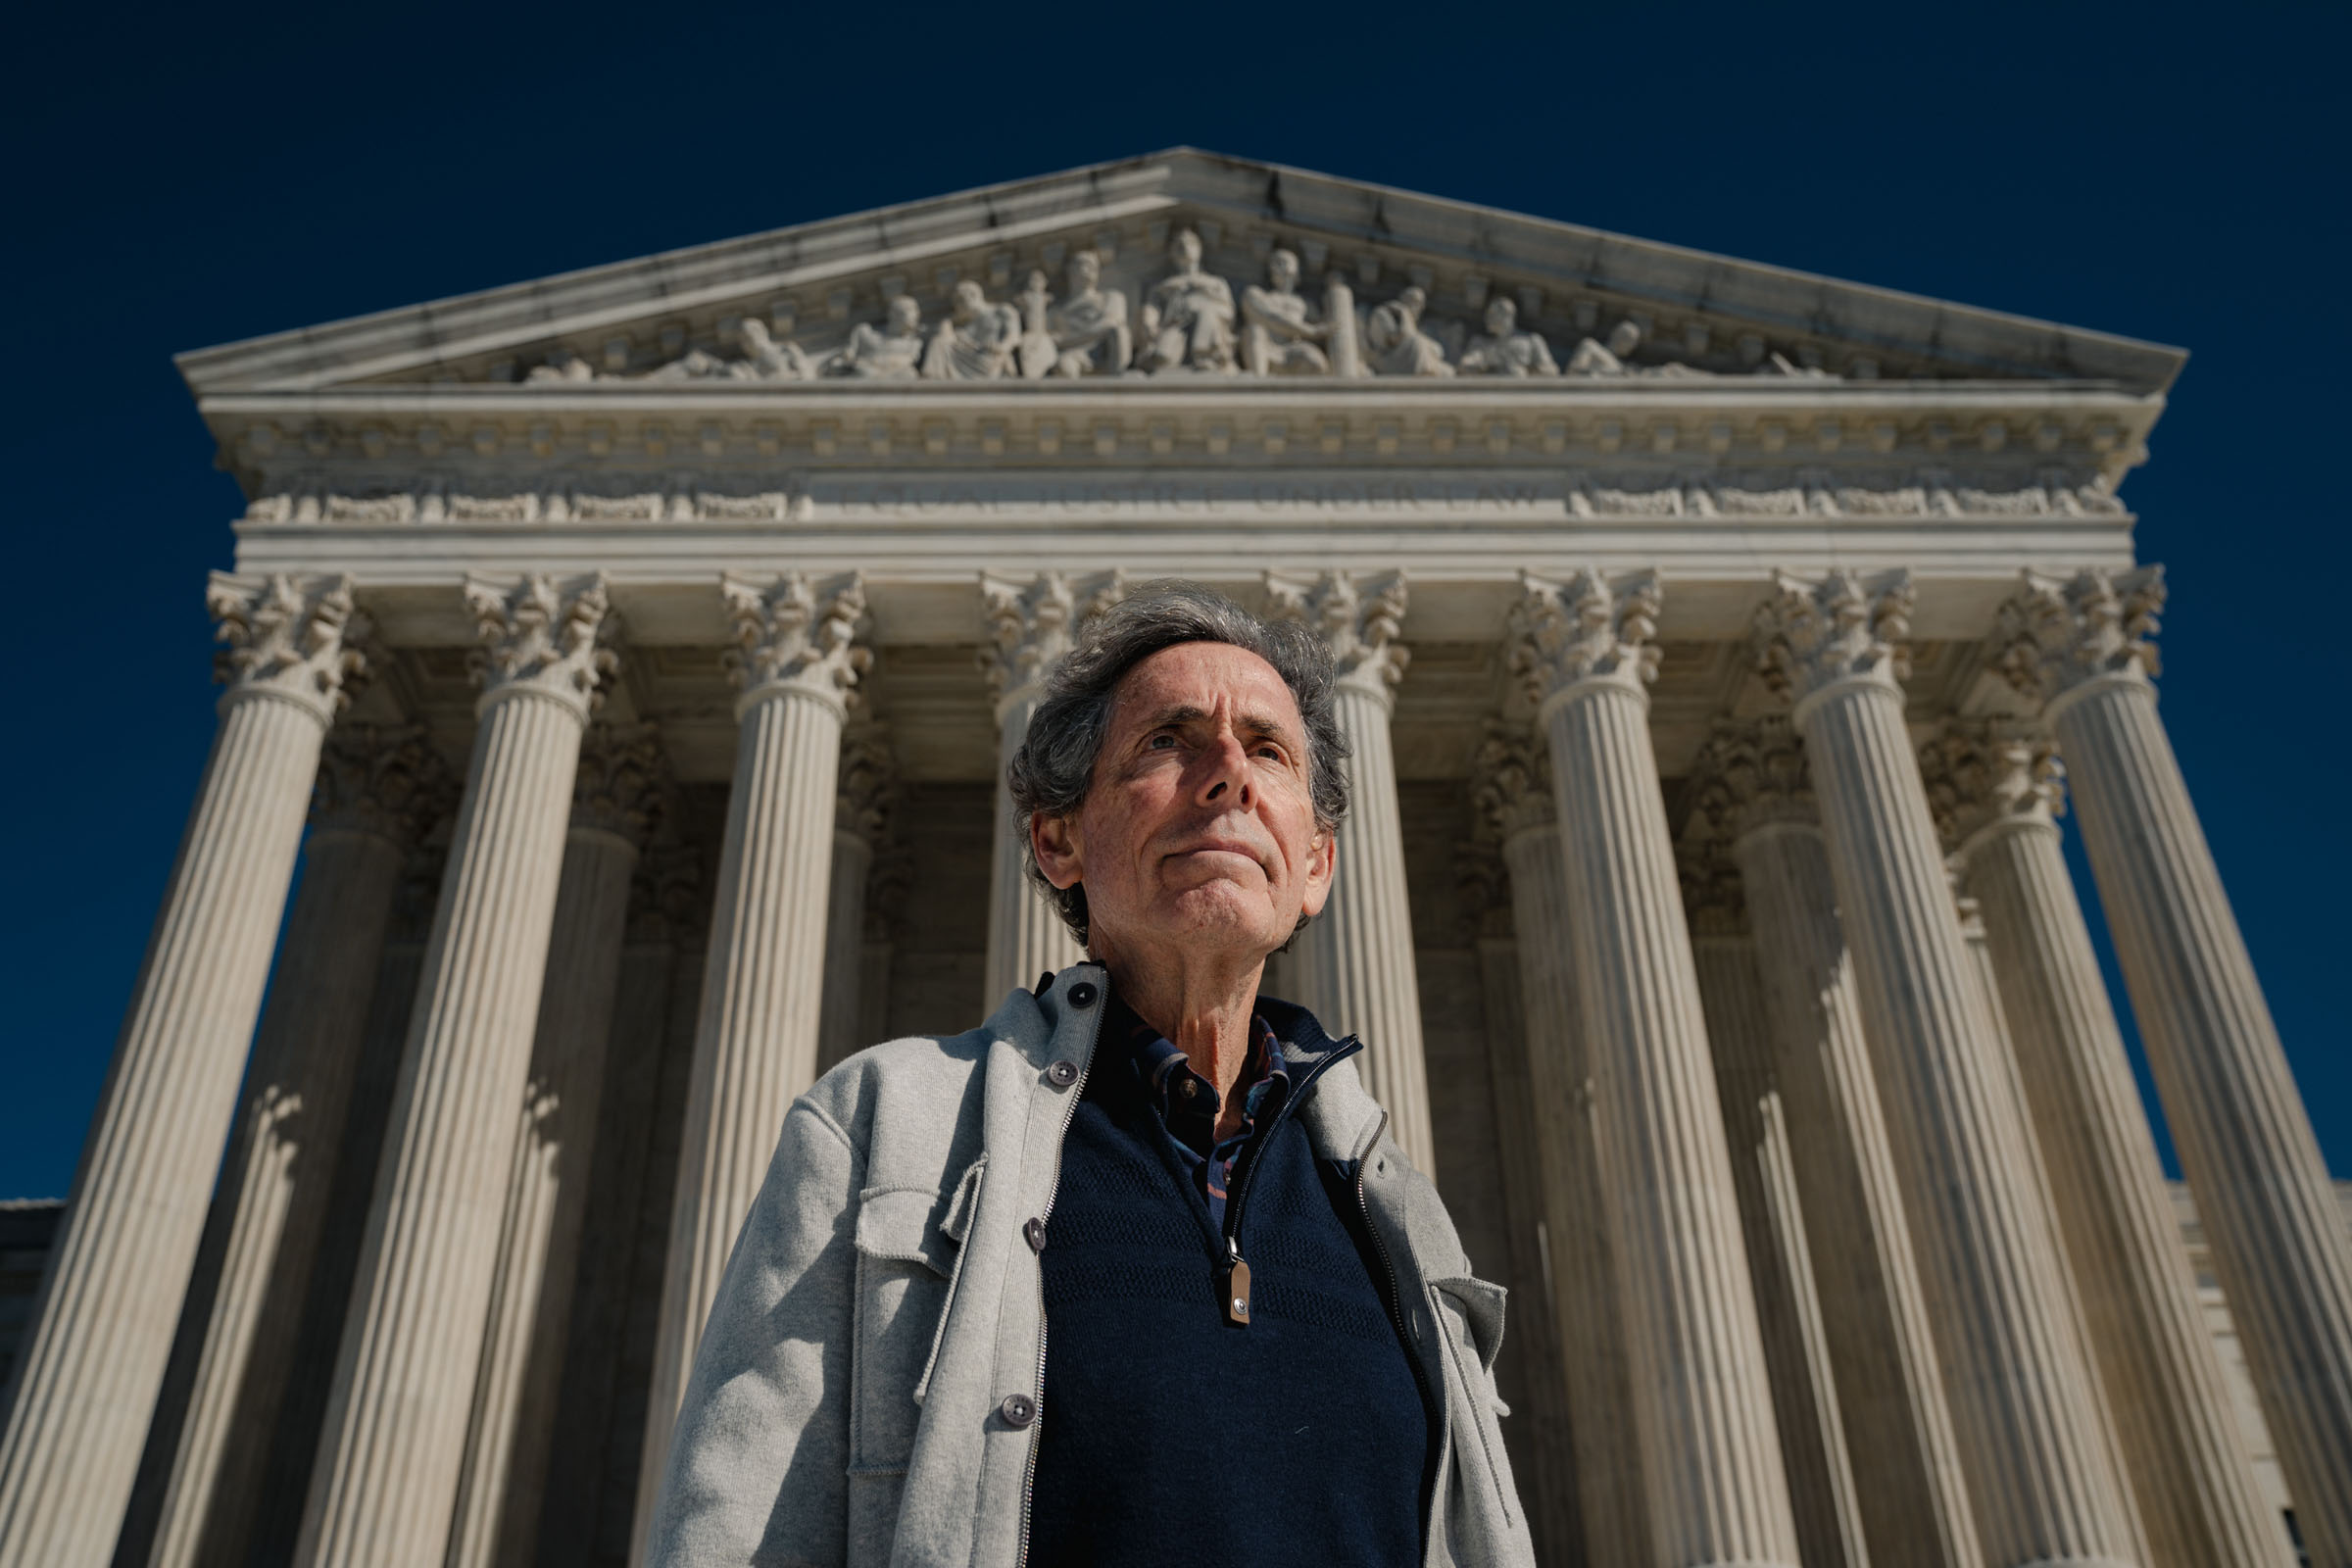 Edward Blum at the Supreme Court of the United States in Washington, DC